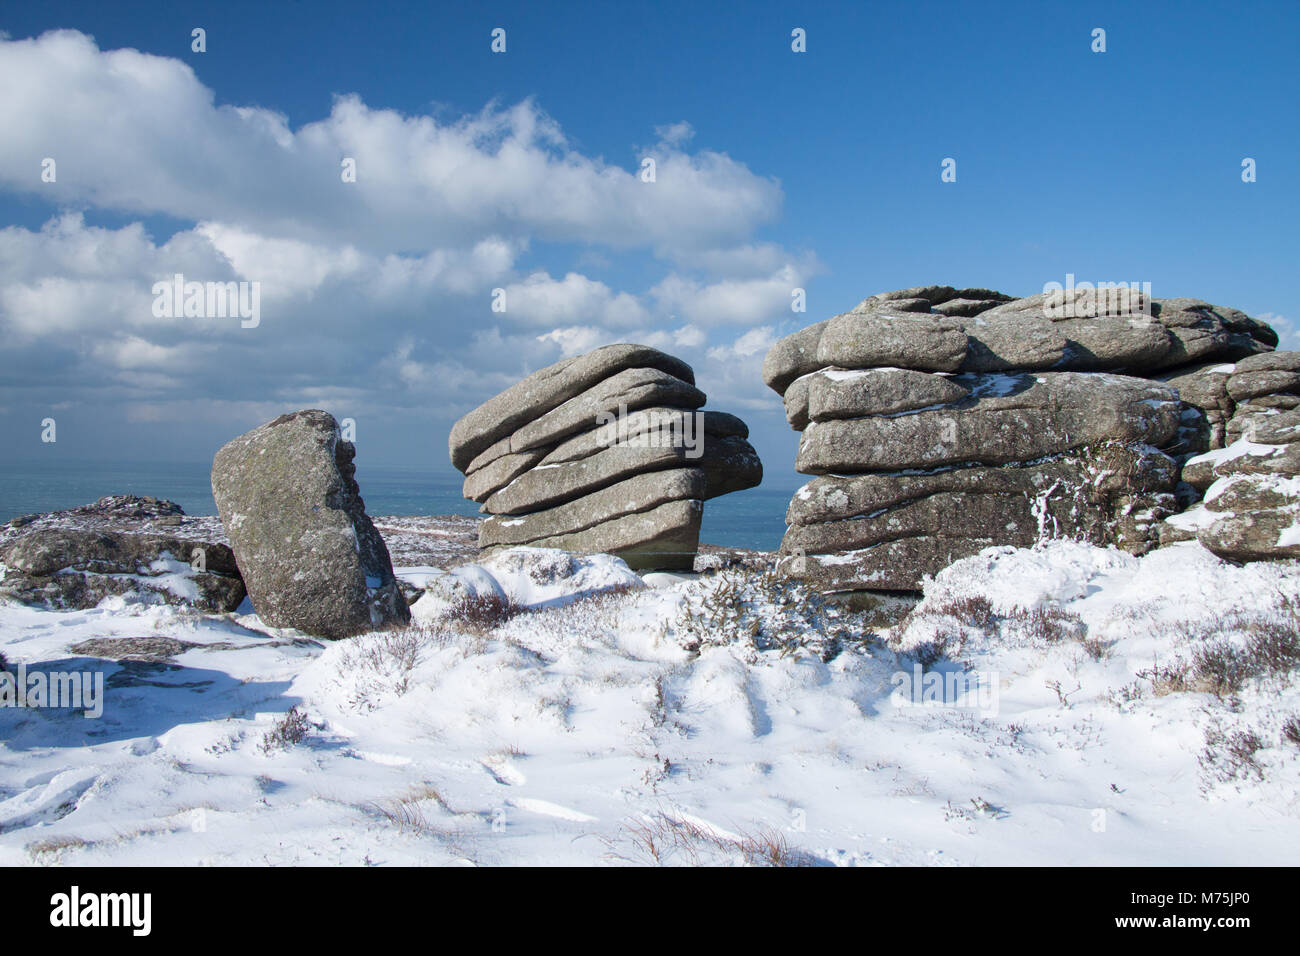 Sculptural granite rock formations in snow on Zennor Hill, Cornwall Stock Photo